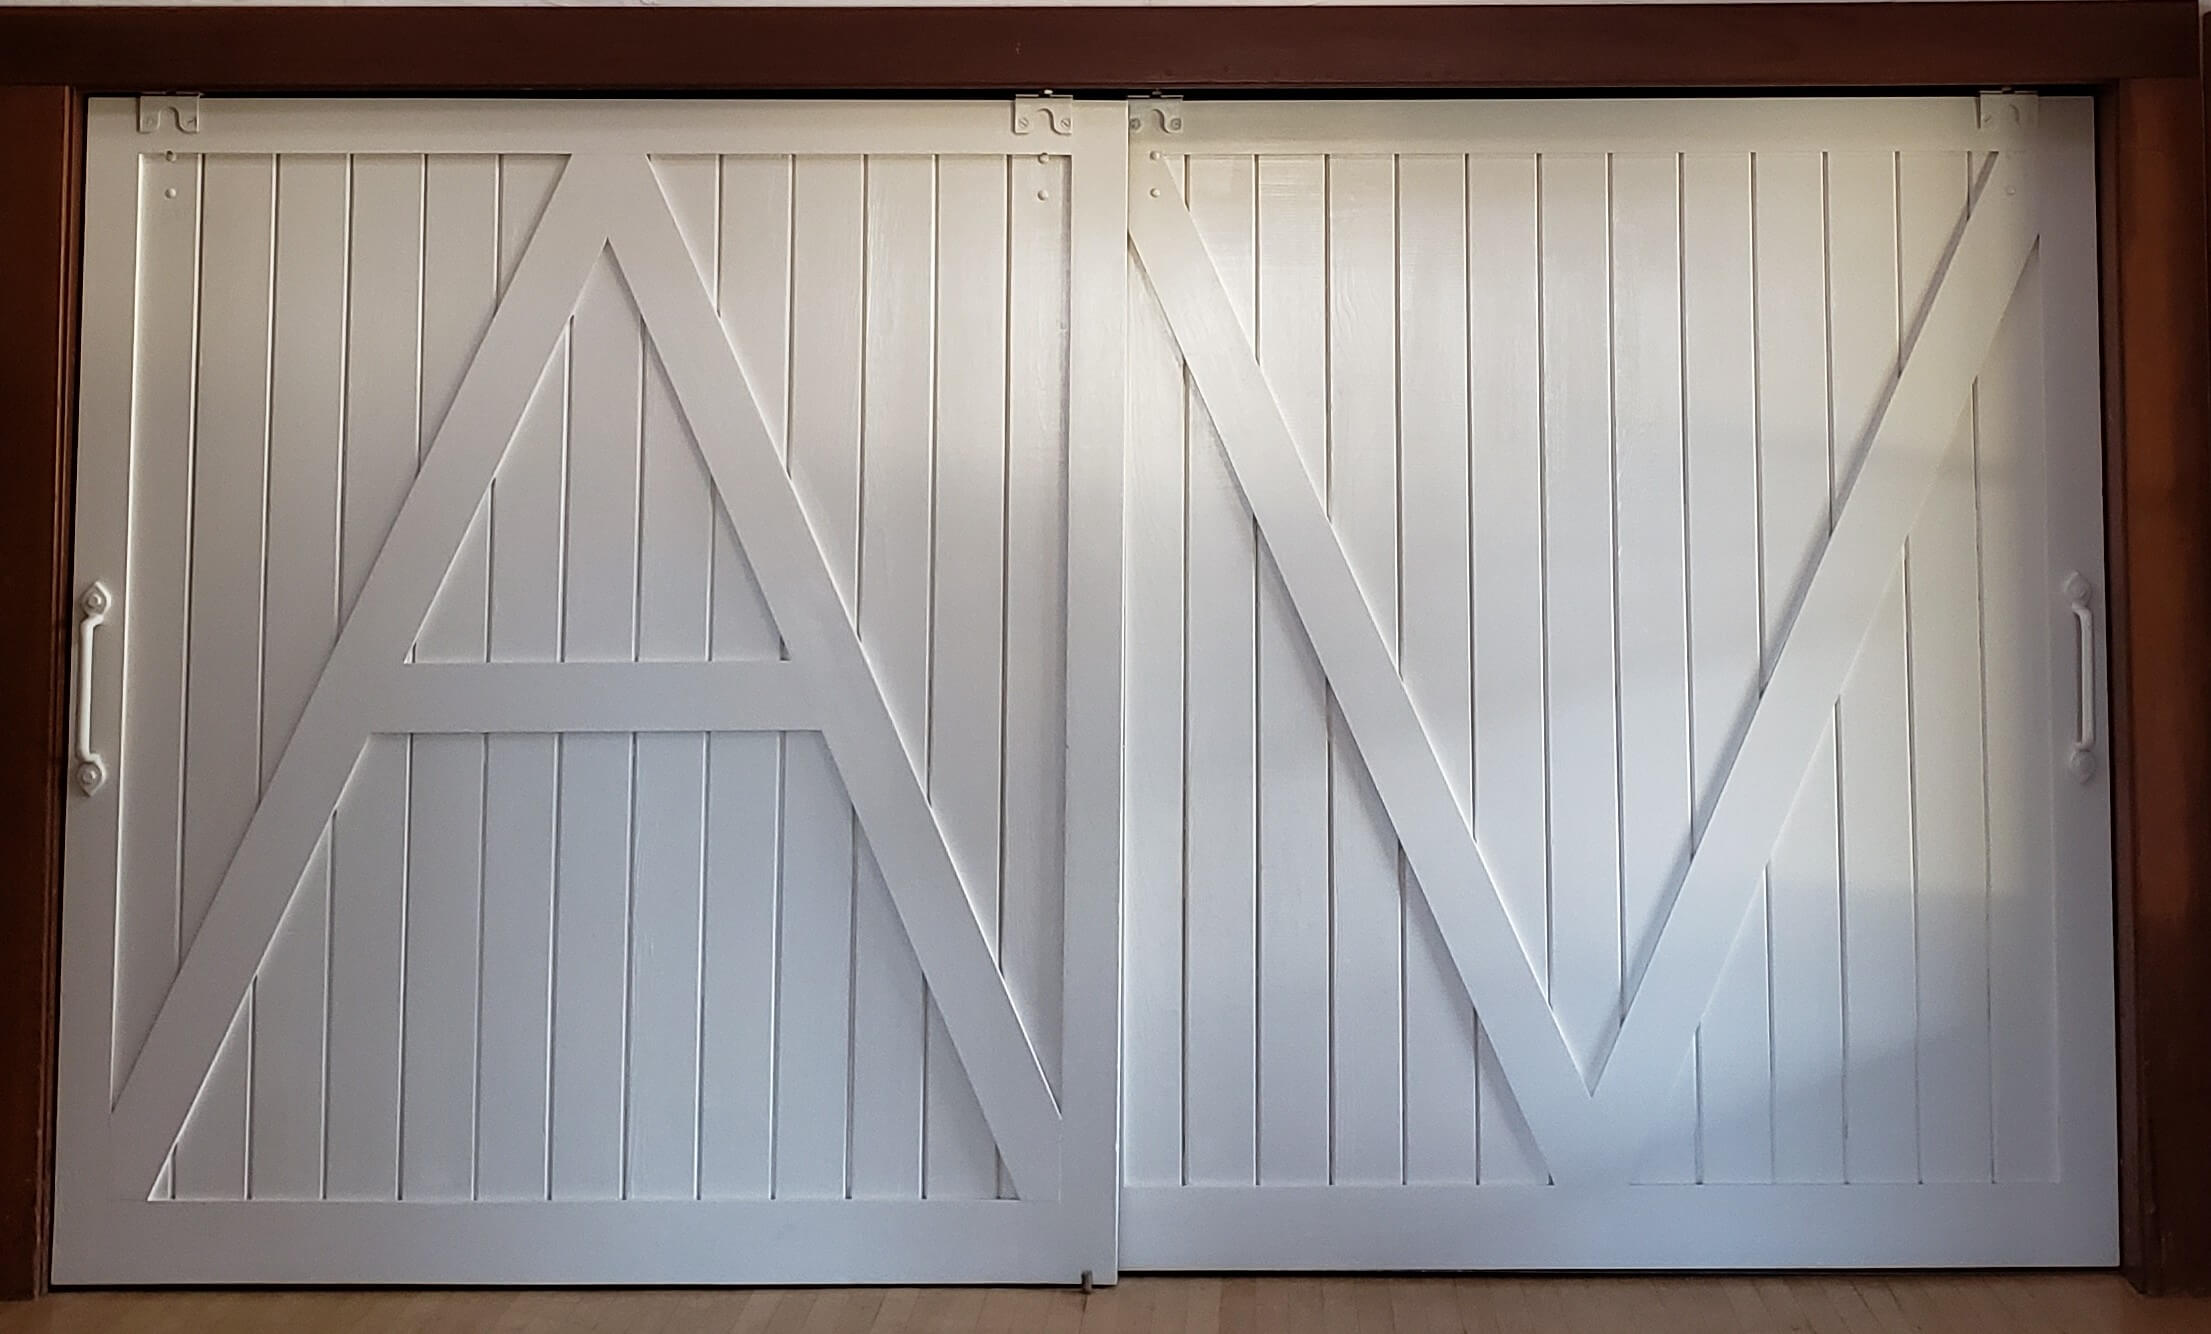 White barn doors with a large letter 'A' on the left hand door and a large letter 'V' on the right hand door